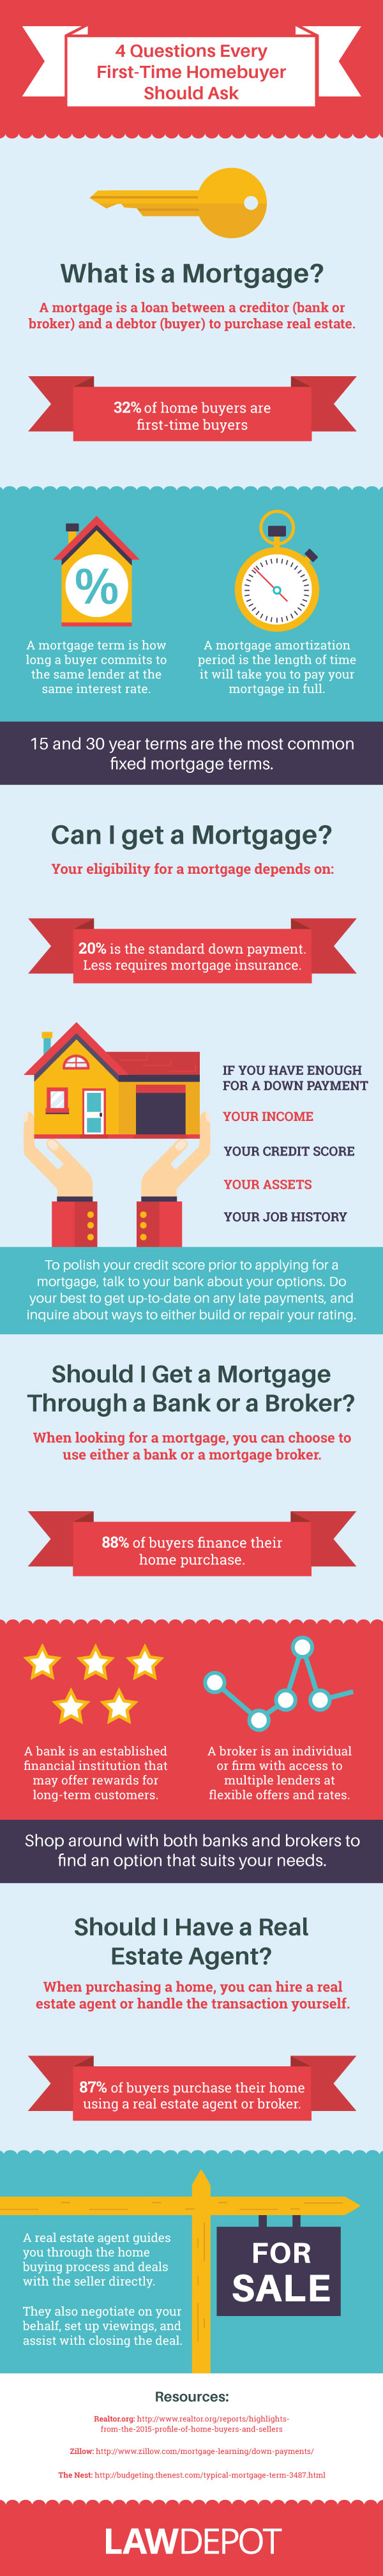 4 Questions Every First-Time Homebuyer Should Ask [Infographic]